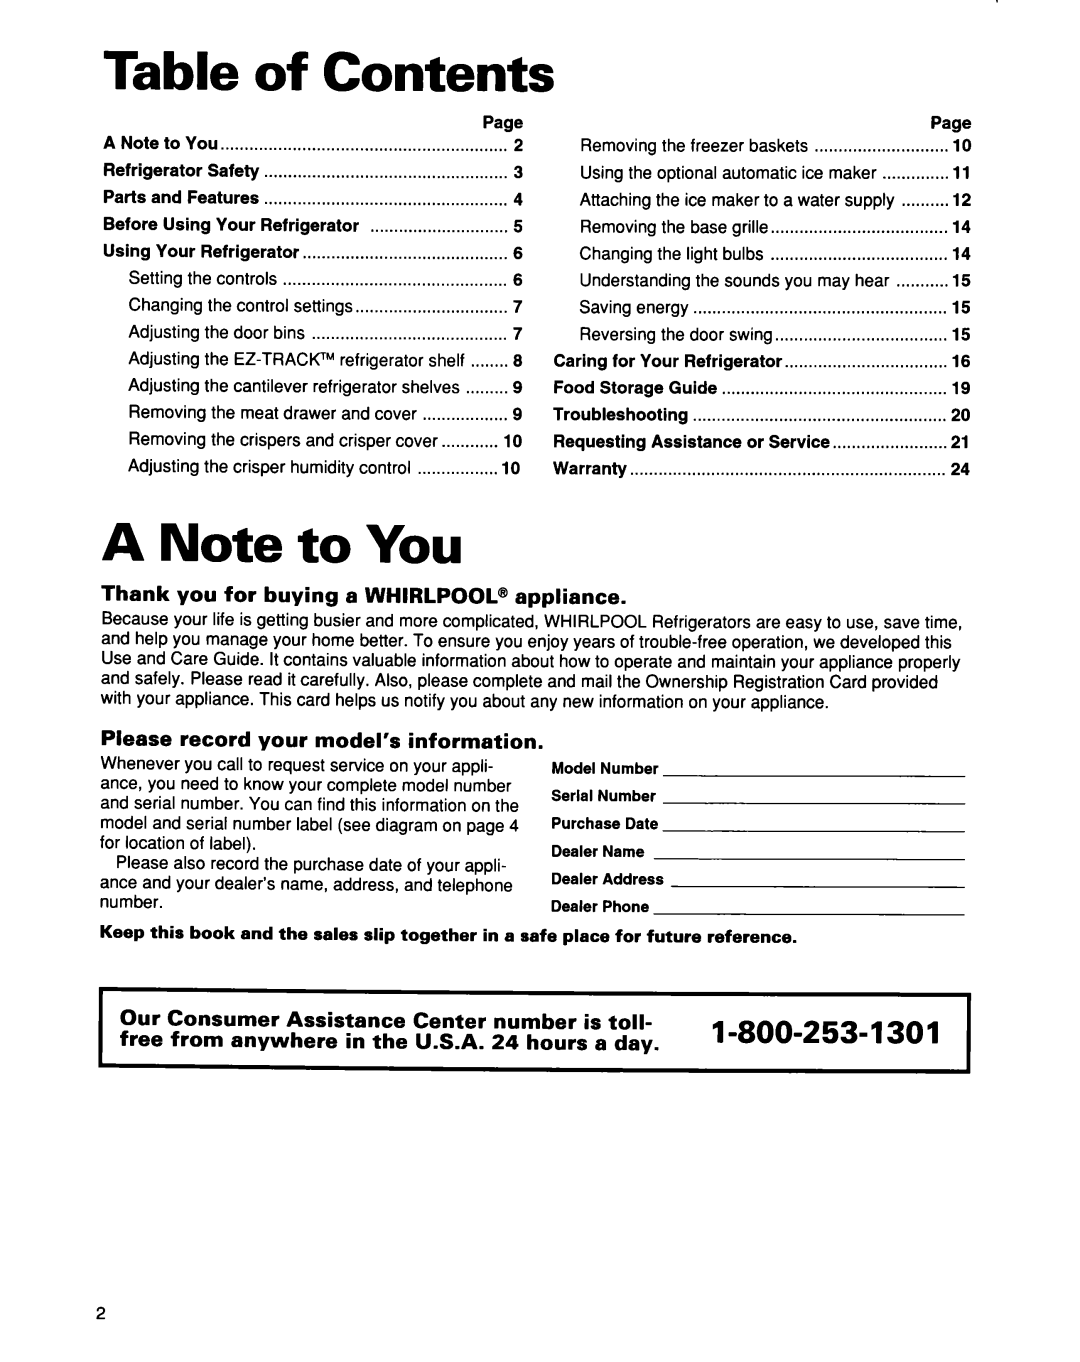 Whirlpool EB21DKXDB01 warranty Table, A Note to You, 1-800-253-1301, Contents 